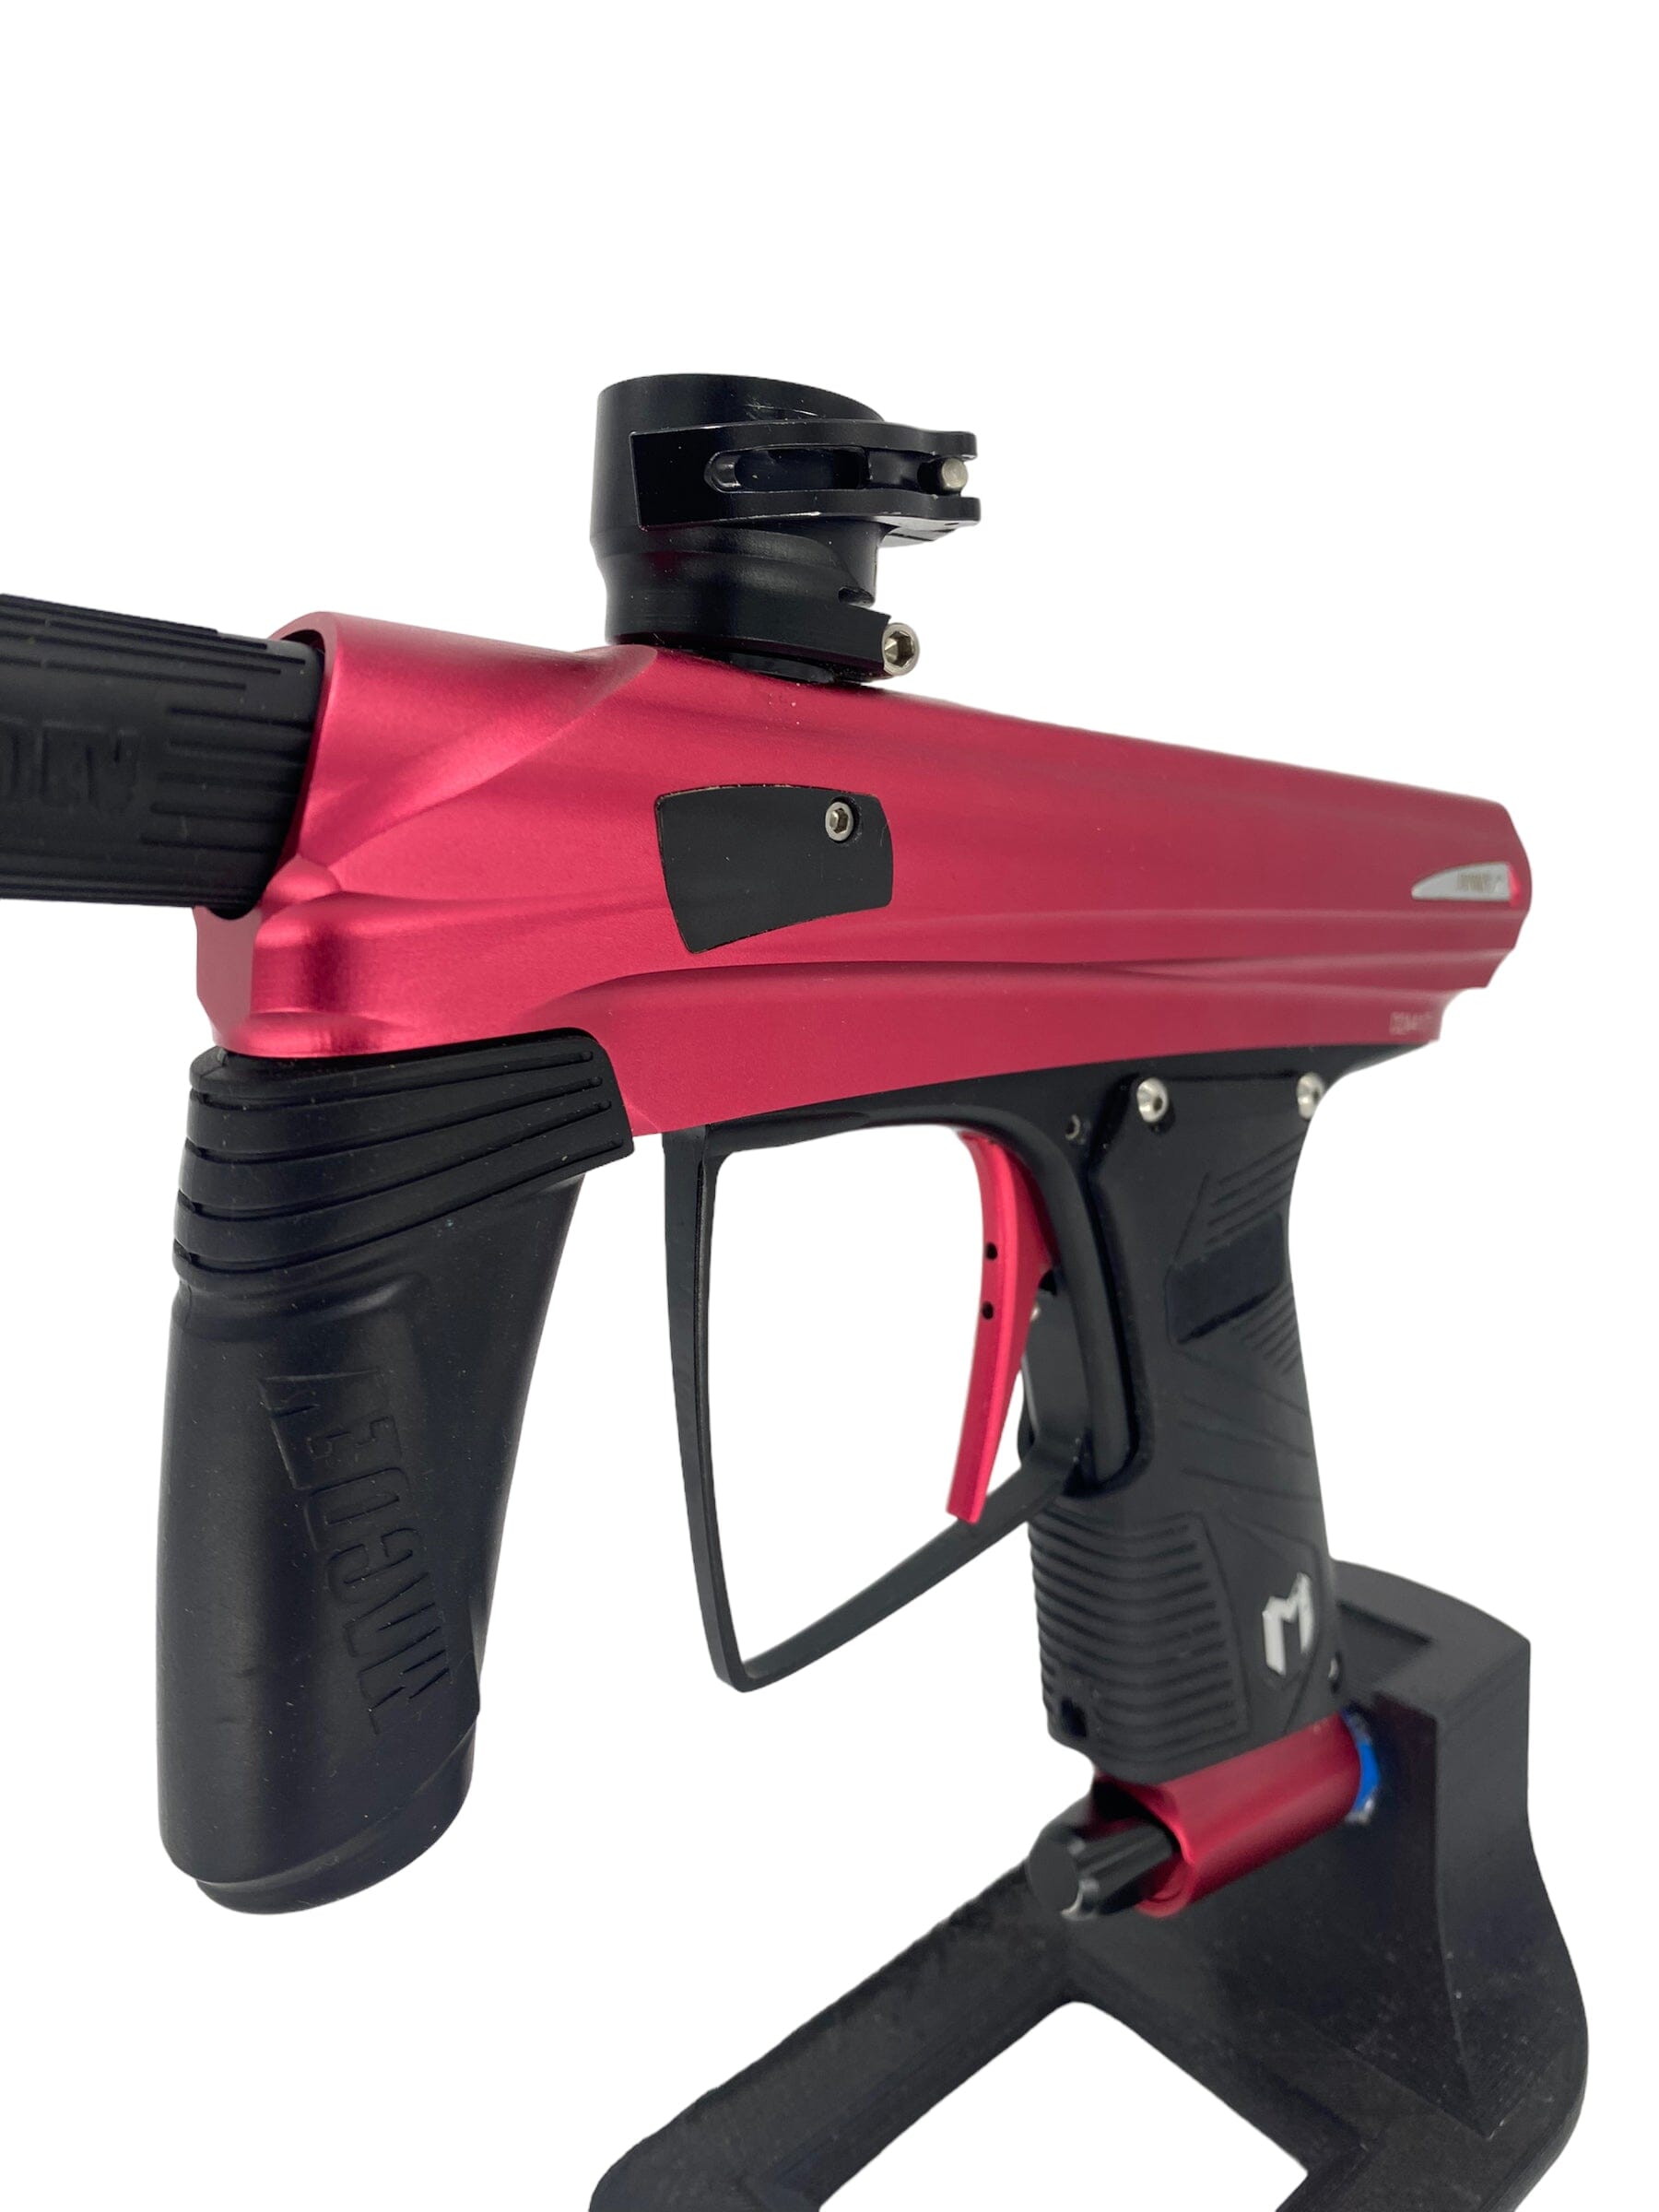 Used MacDev Drone 2 Paintball Gun from CPXBrosPaintball Buy/Sell/Trade Paintball Markers, Paintball Hoppers, Paintball Masks, and Hormesis Headbands